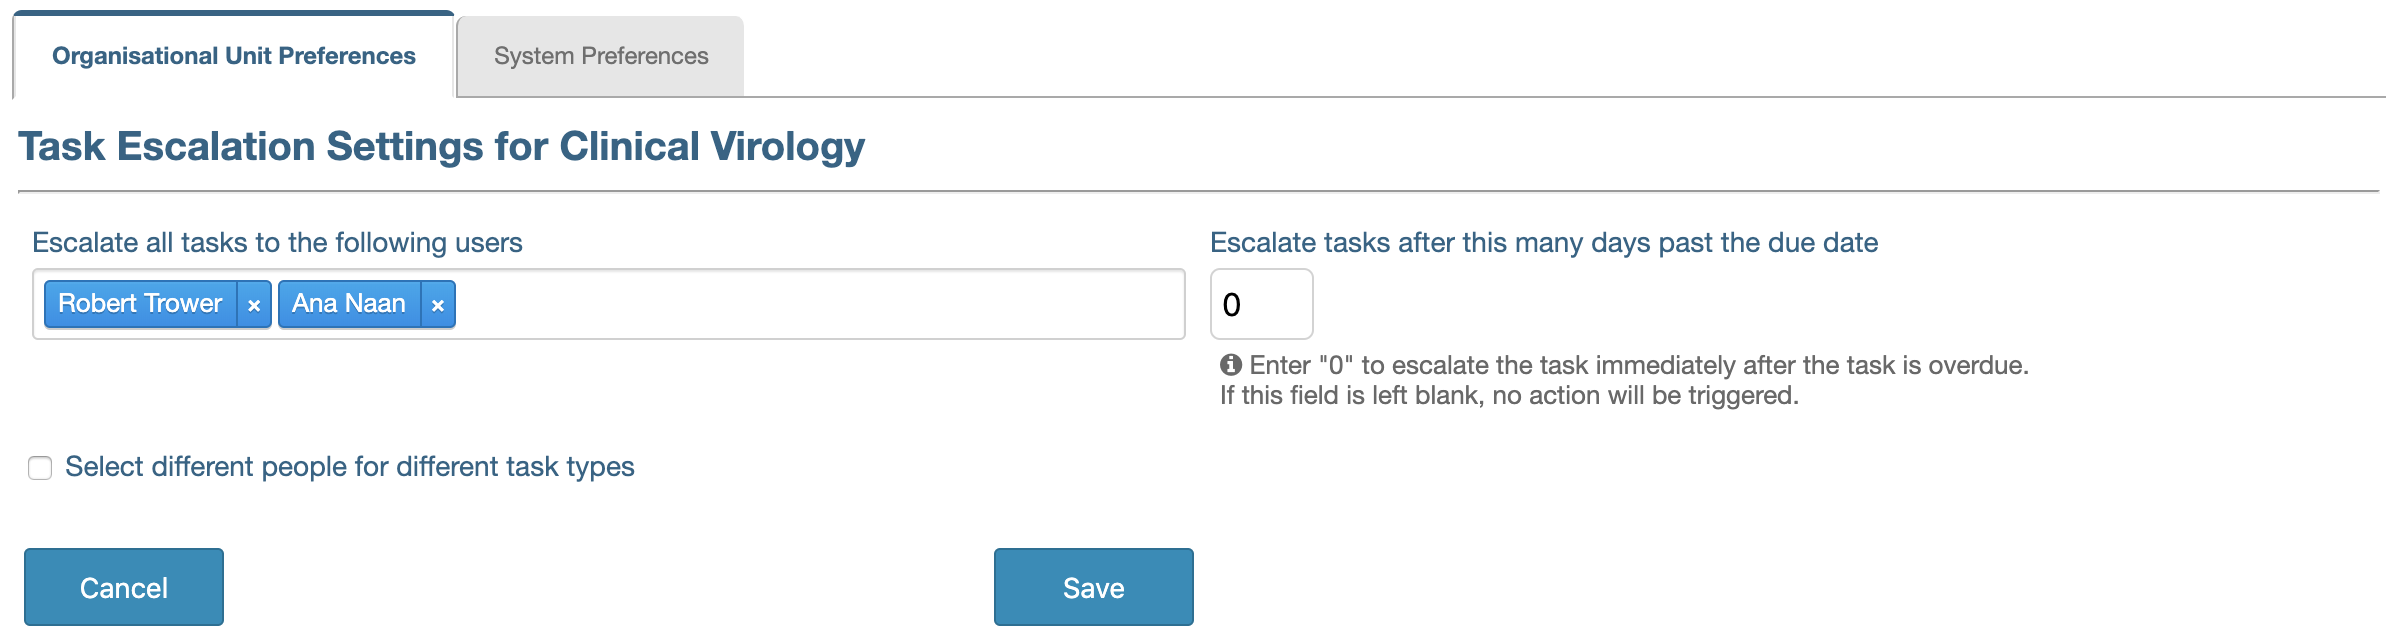 Image demonstrates adding 2 users to escalate all tasks too in the Task 	Escalation settings page.